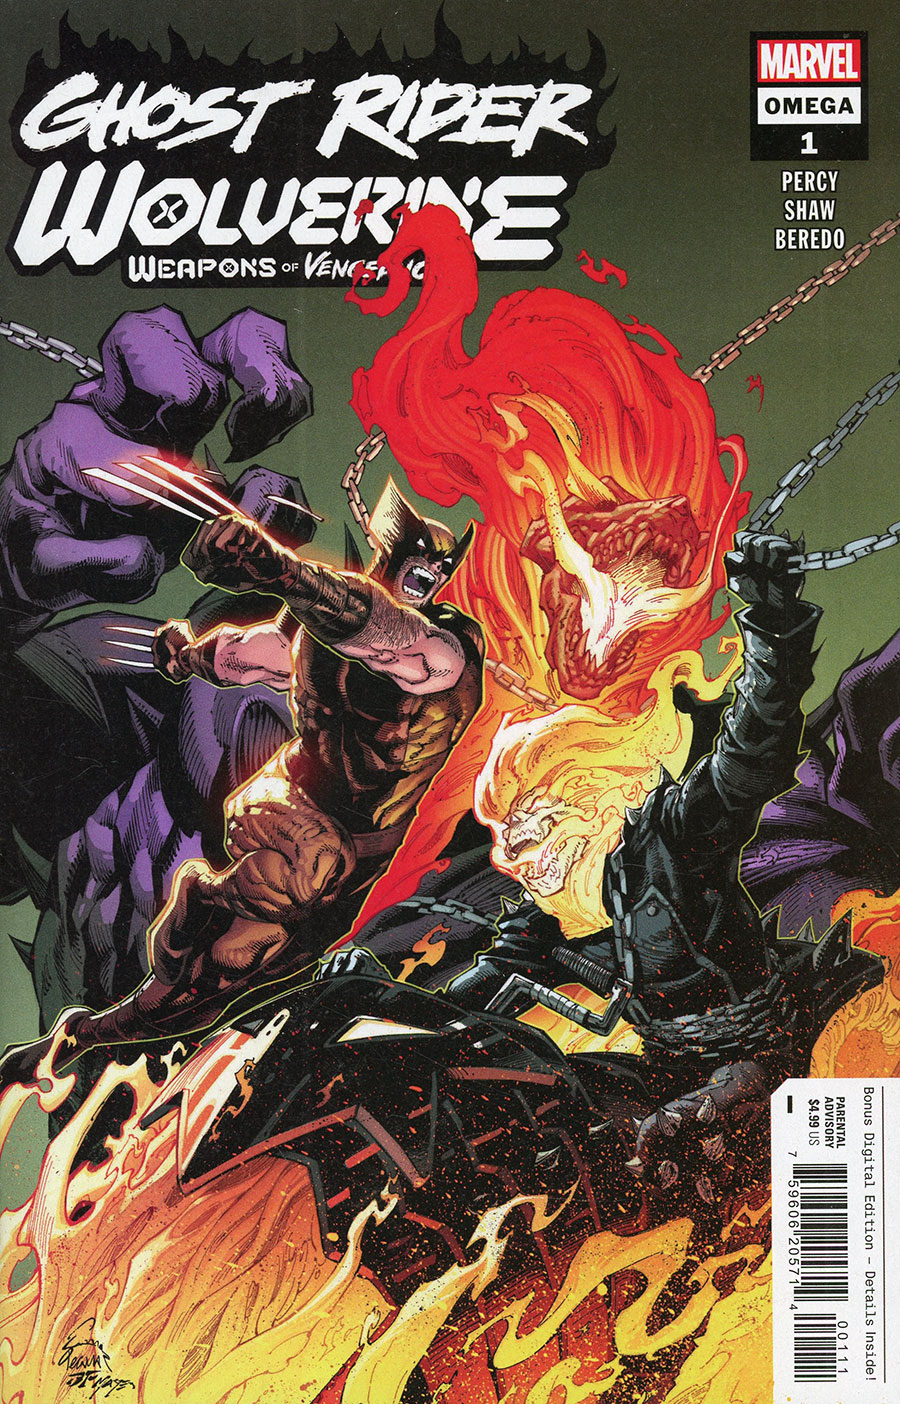 Ghost Rider Wolverine Weapons Of Vengeance Omega #1 (One Shot) Cover A Regular Ryan Stegman Cover (Weapons Of Vengeance Part 4)